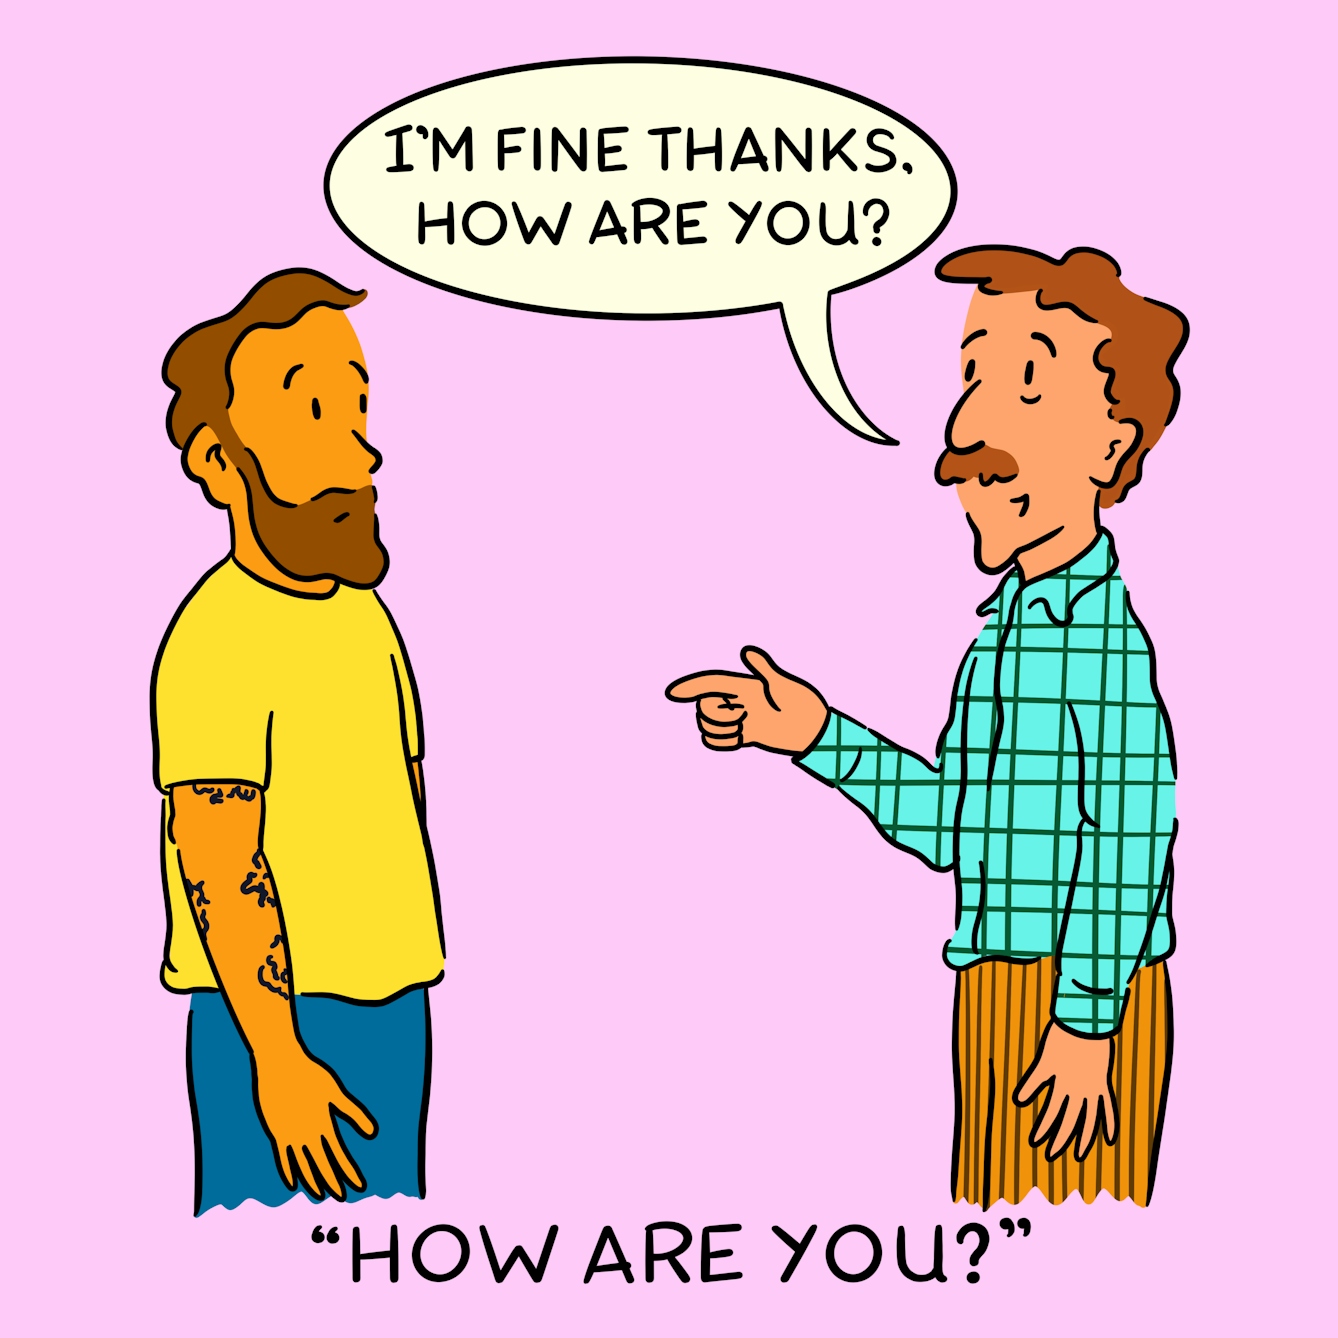 Panel 4 of a four-panel comic drawn digitally: a white man with a moustache in a plaid shirt says to a bemused white man with tattoed arms "I'm fine thanks. How are you?". The caption text reads "How are you?"